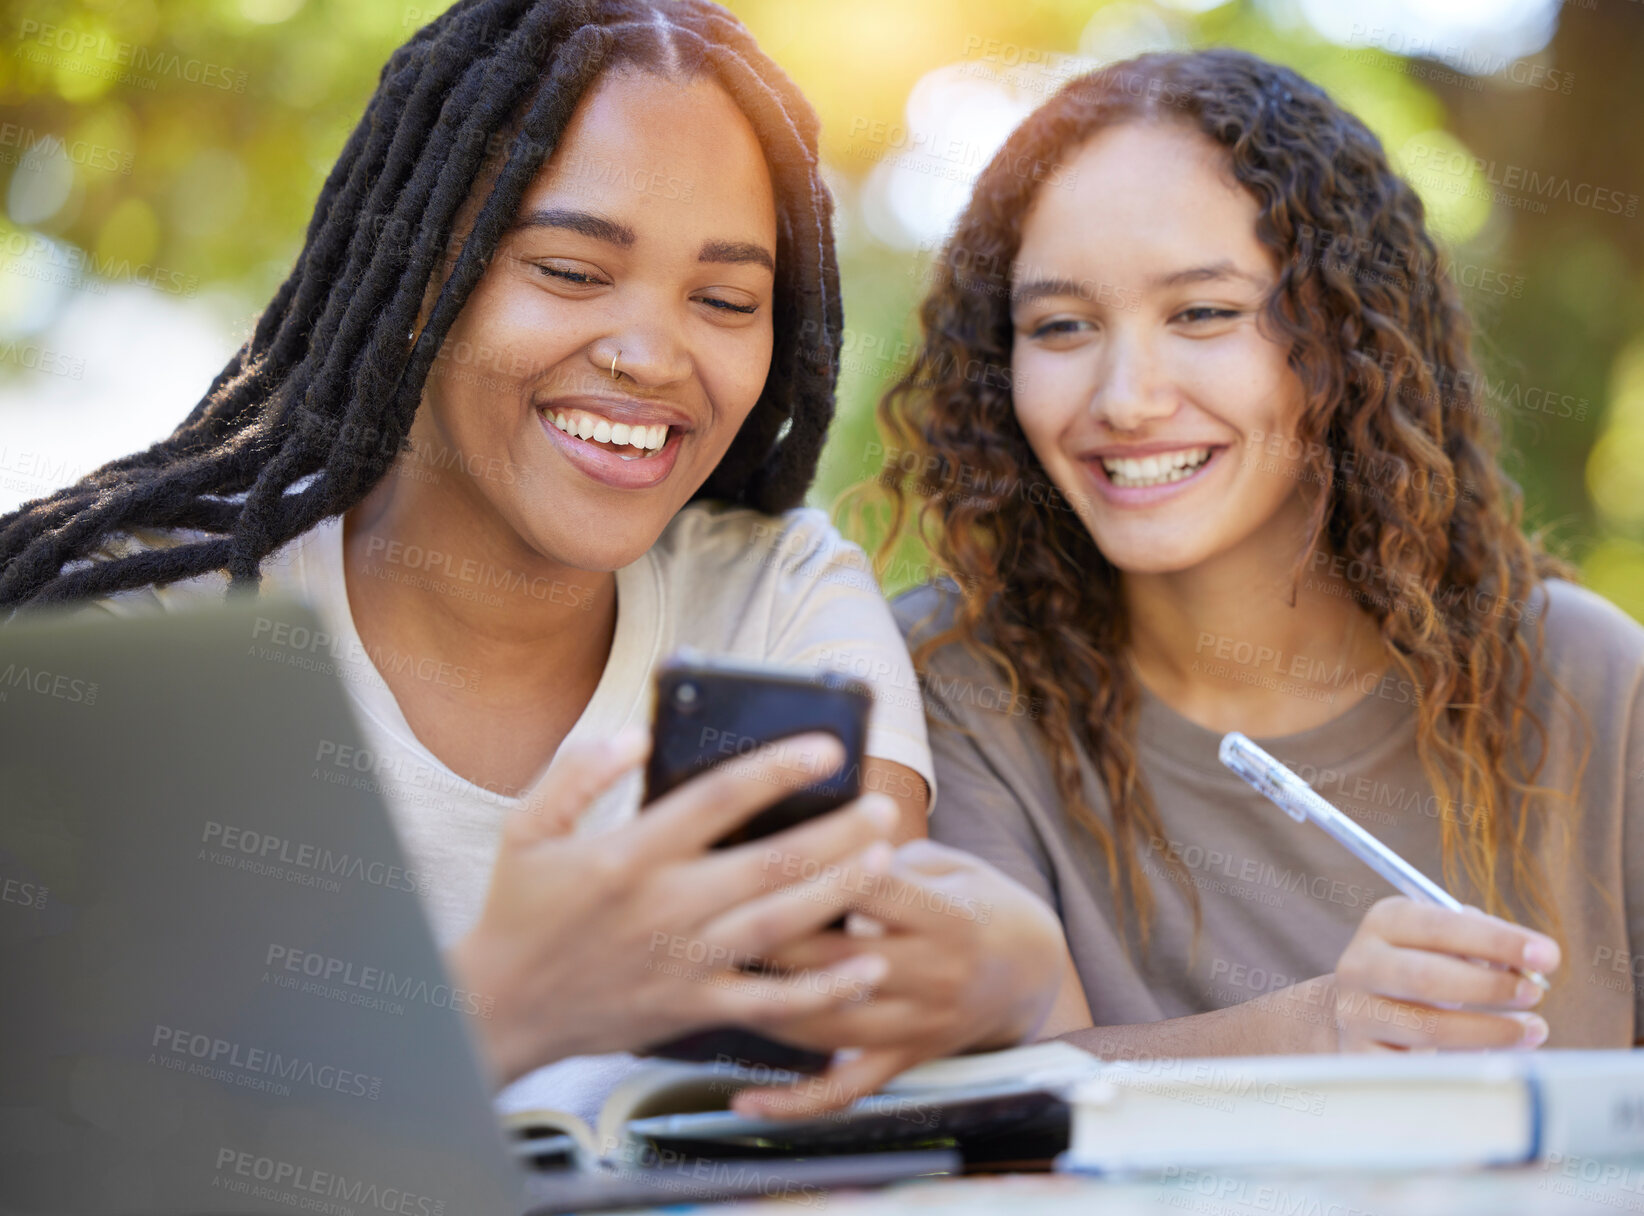 Buy stock photo Students, women and friends with phone at park laughing at funny meme. University scholarship, comic and happy girls or females with mobile smartphone laugh at joke or crazy comedy on social media.